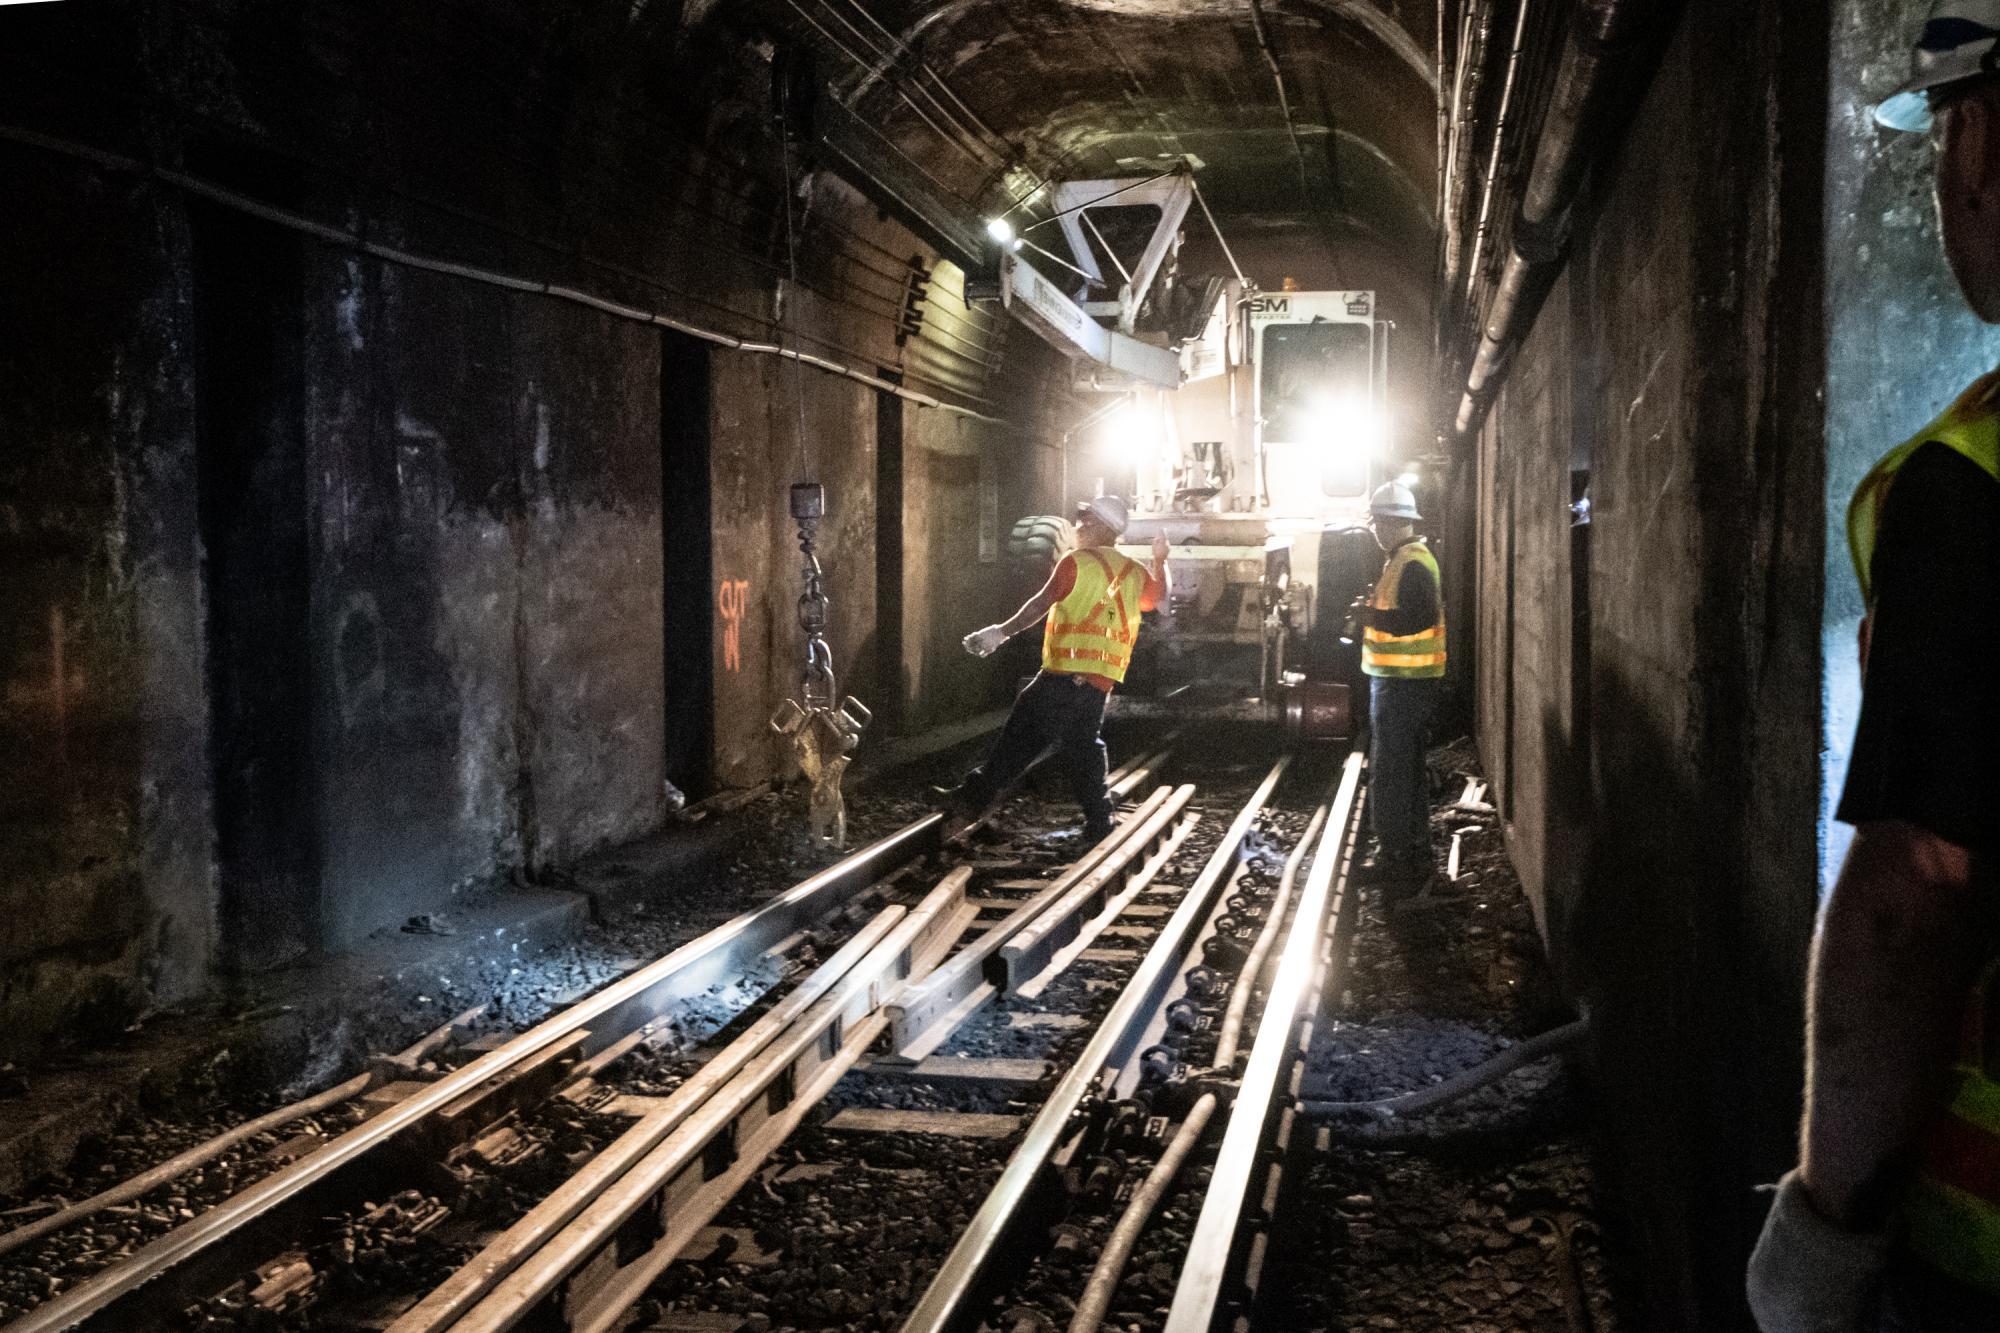 A crew works on rail maintenance in a tunnel, between Bowdoin and Government Center, with heavy machinery in the background.